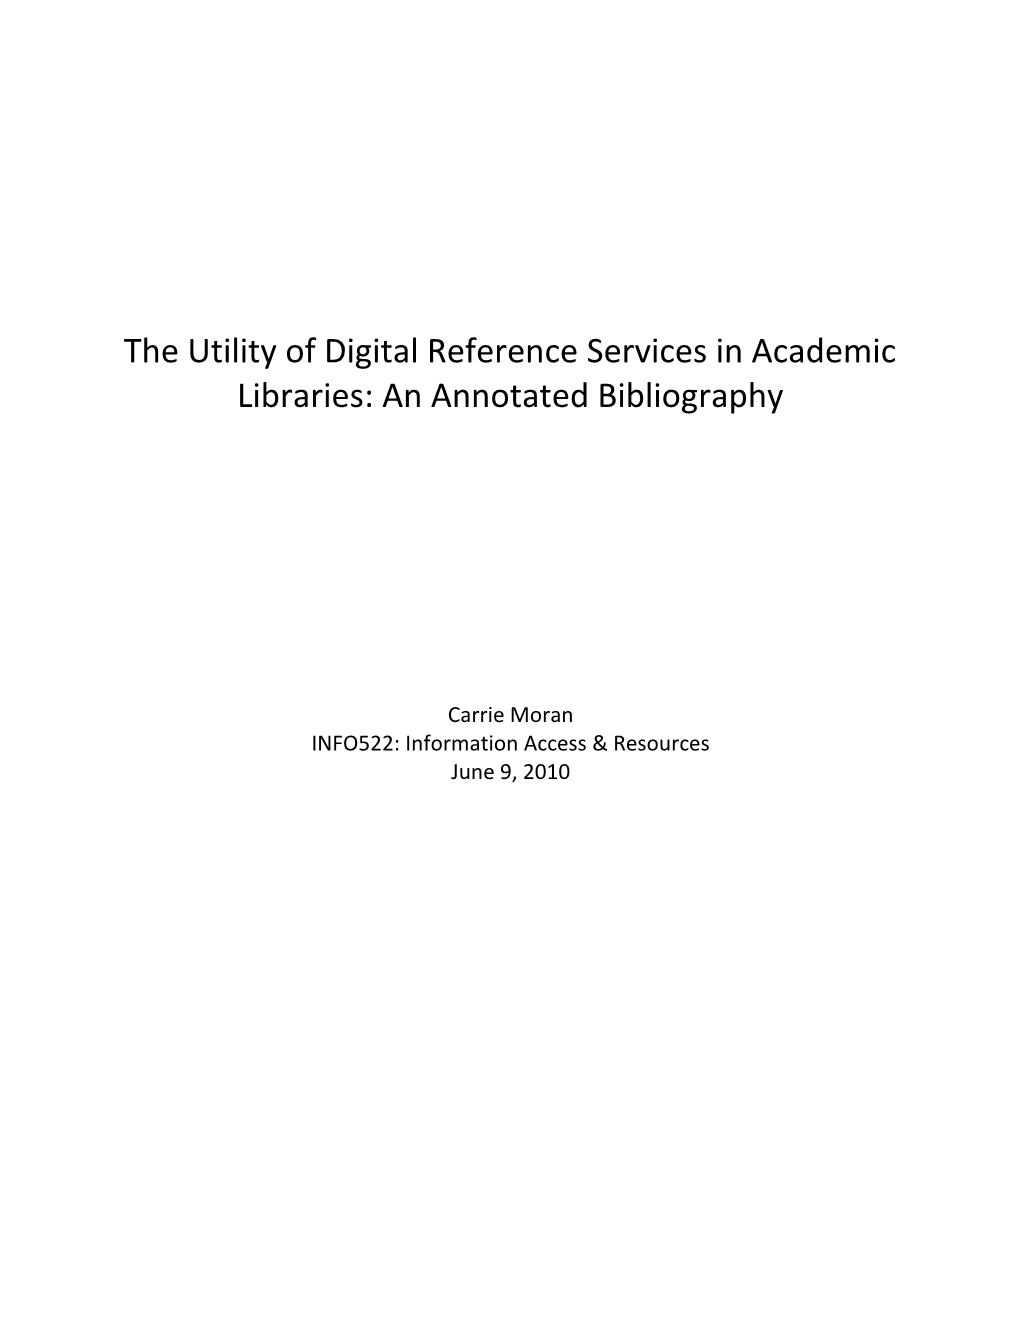 The Utility of Digital Reference Services in Academic Libraries: an Annotated Bibliography